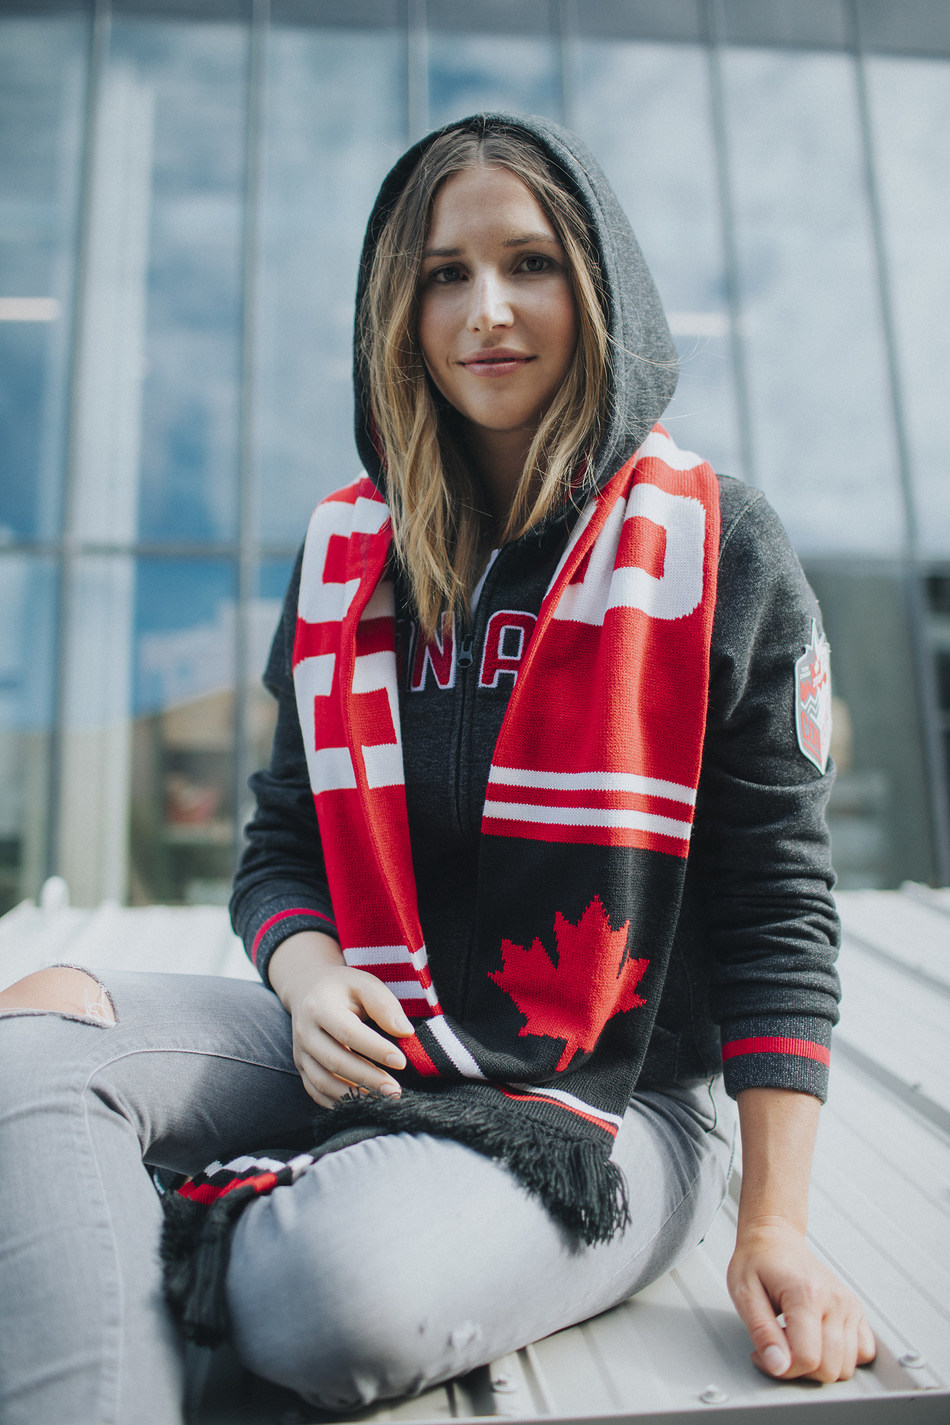 Erin Latimer, Para Alpine Skiing - Erin Latimer wears the Official Hudson's Bay Team Canada Collection for PyeongChang 2018 (CNW Group/Hudson's Bay)